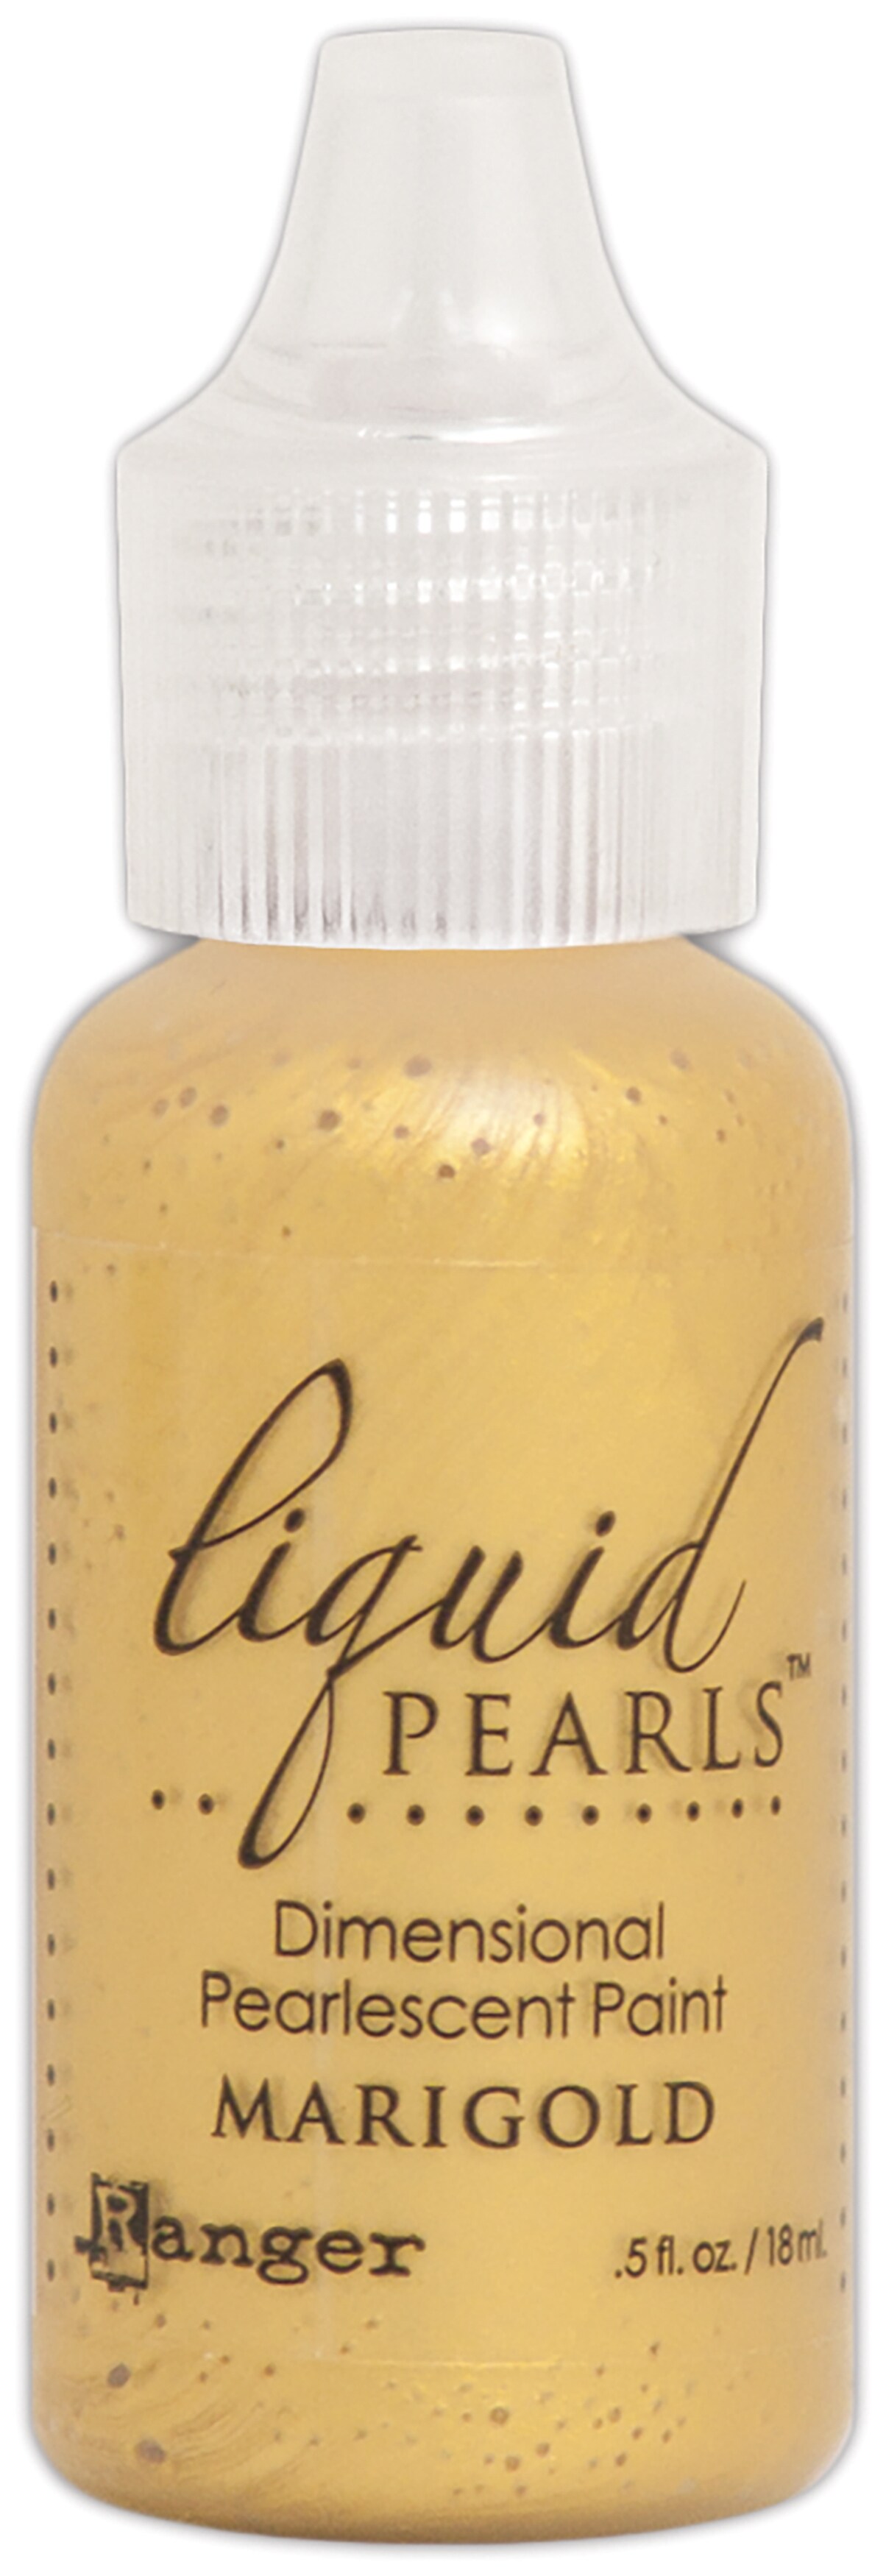 Craft Product Review: Liquid Pearls by Ranger